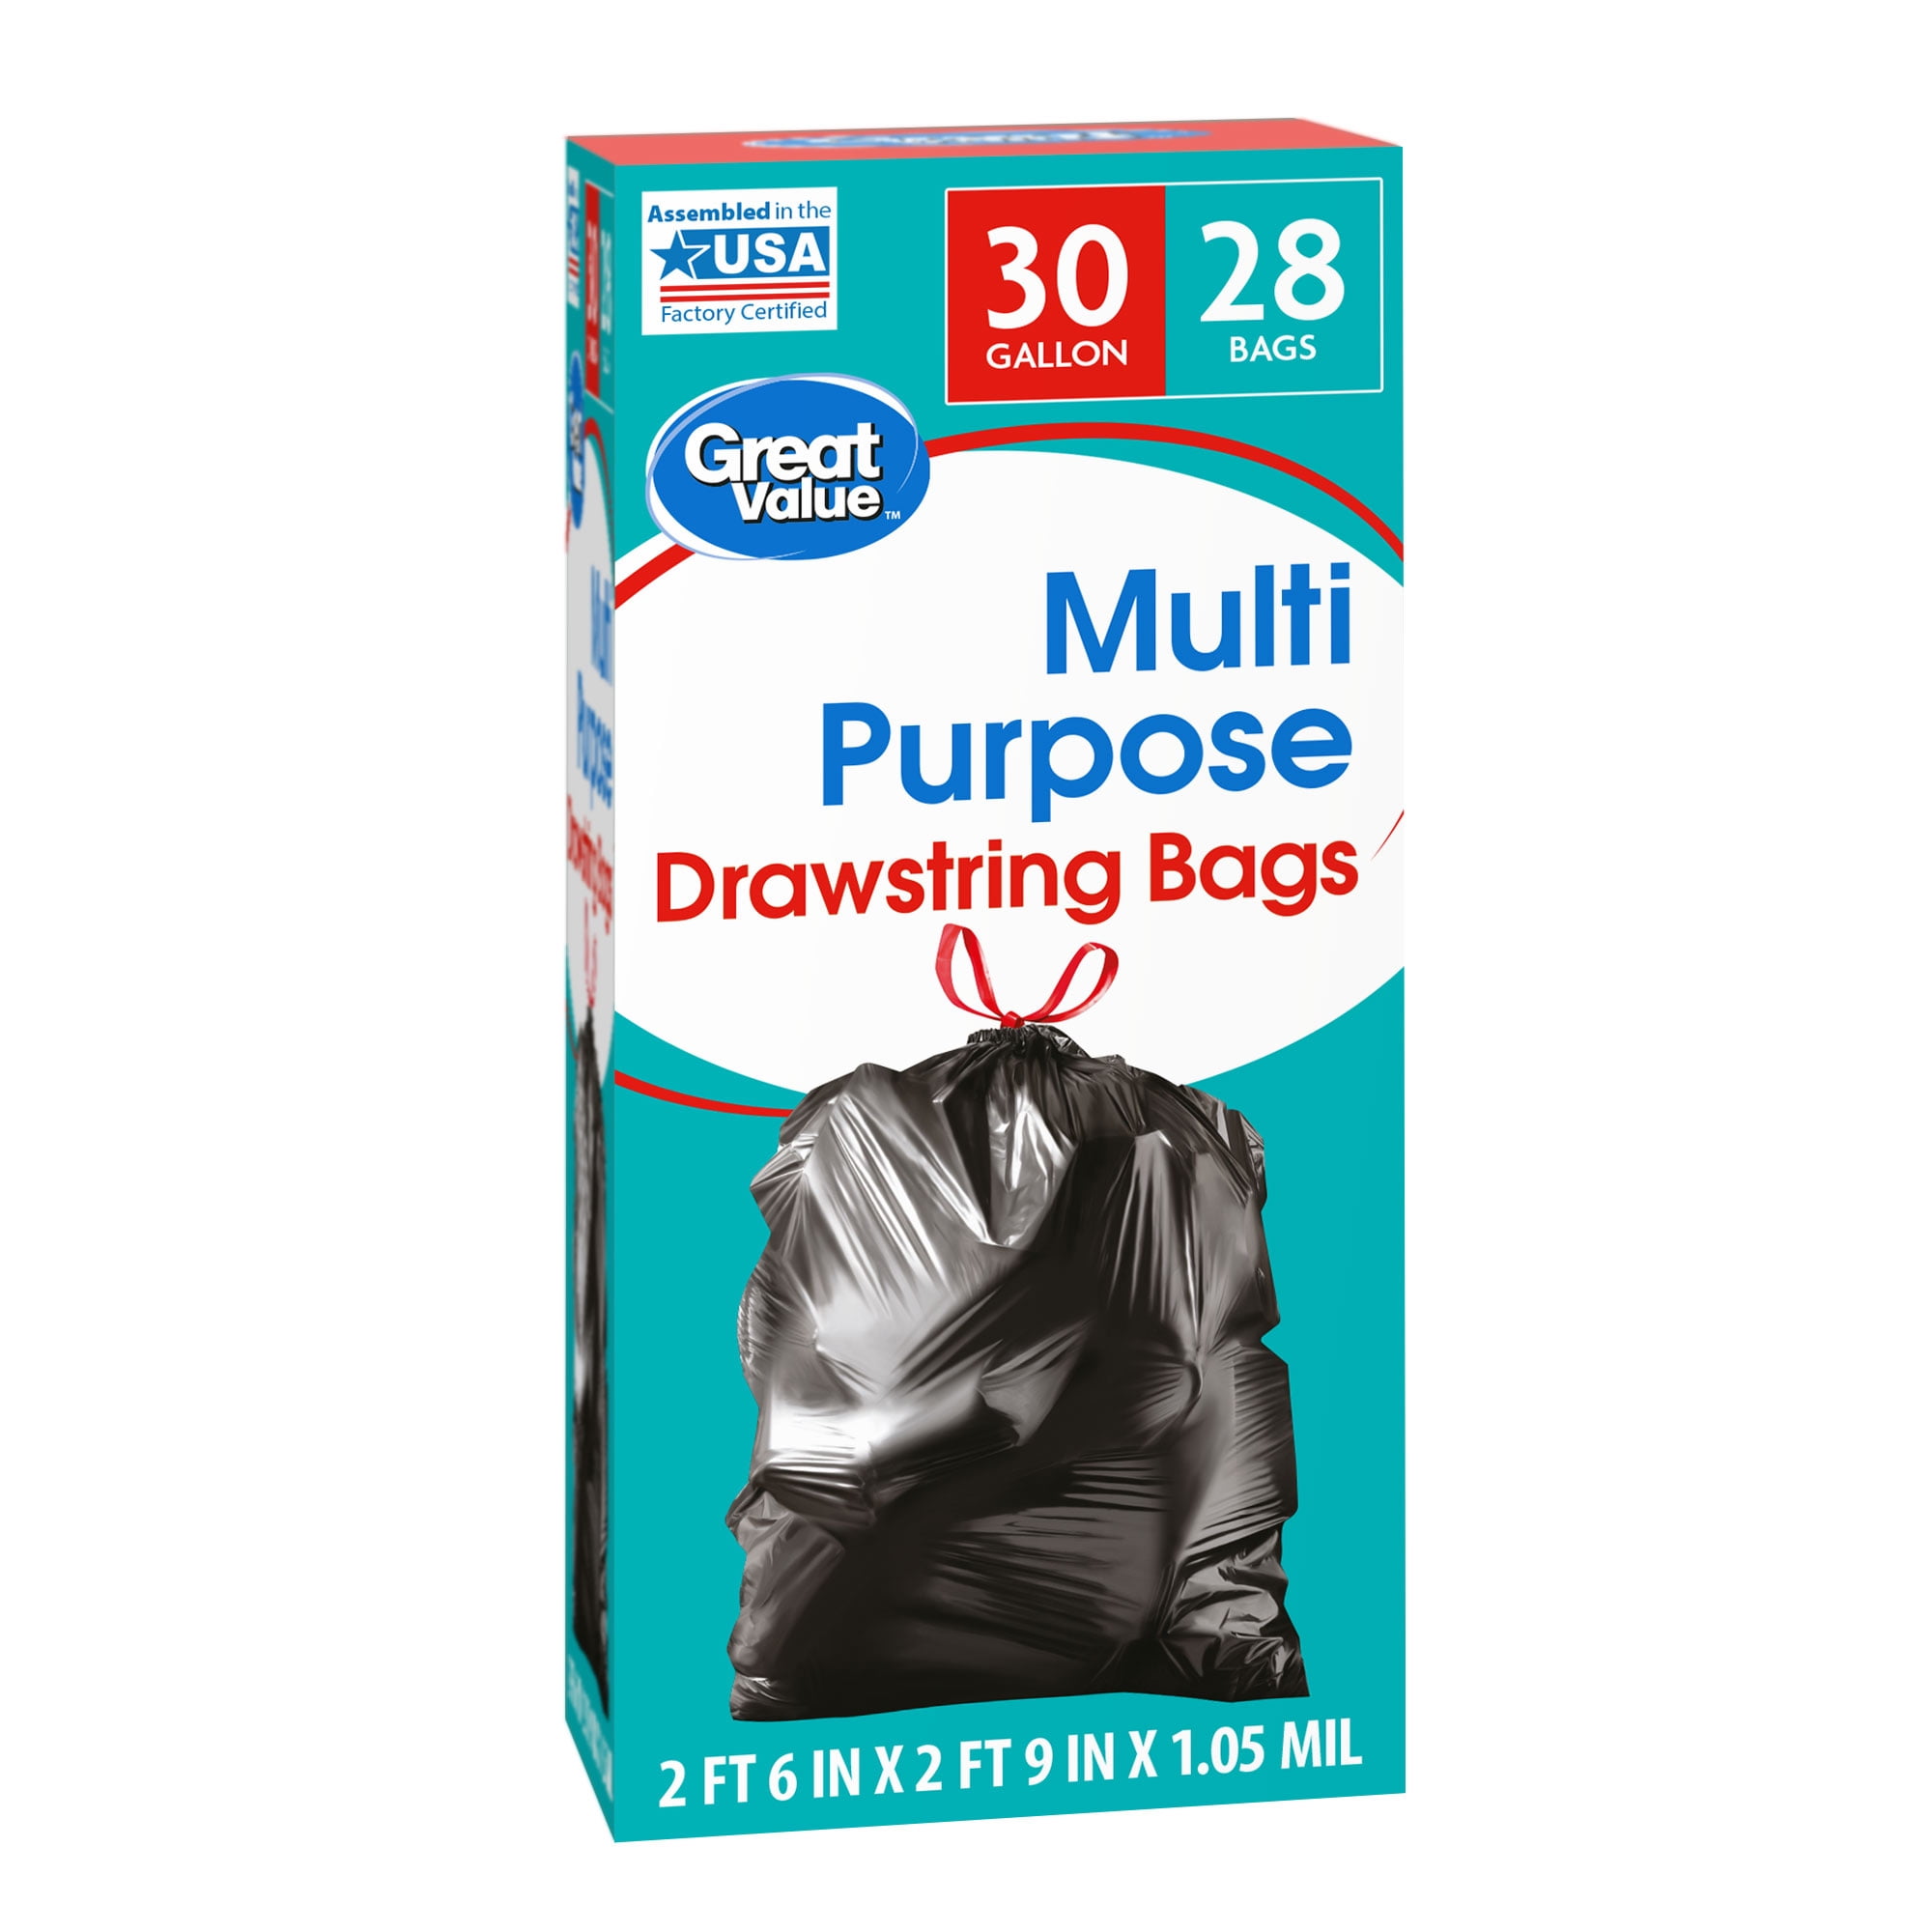 Trash bags 70 gallons thick deluxe type - Makhazin